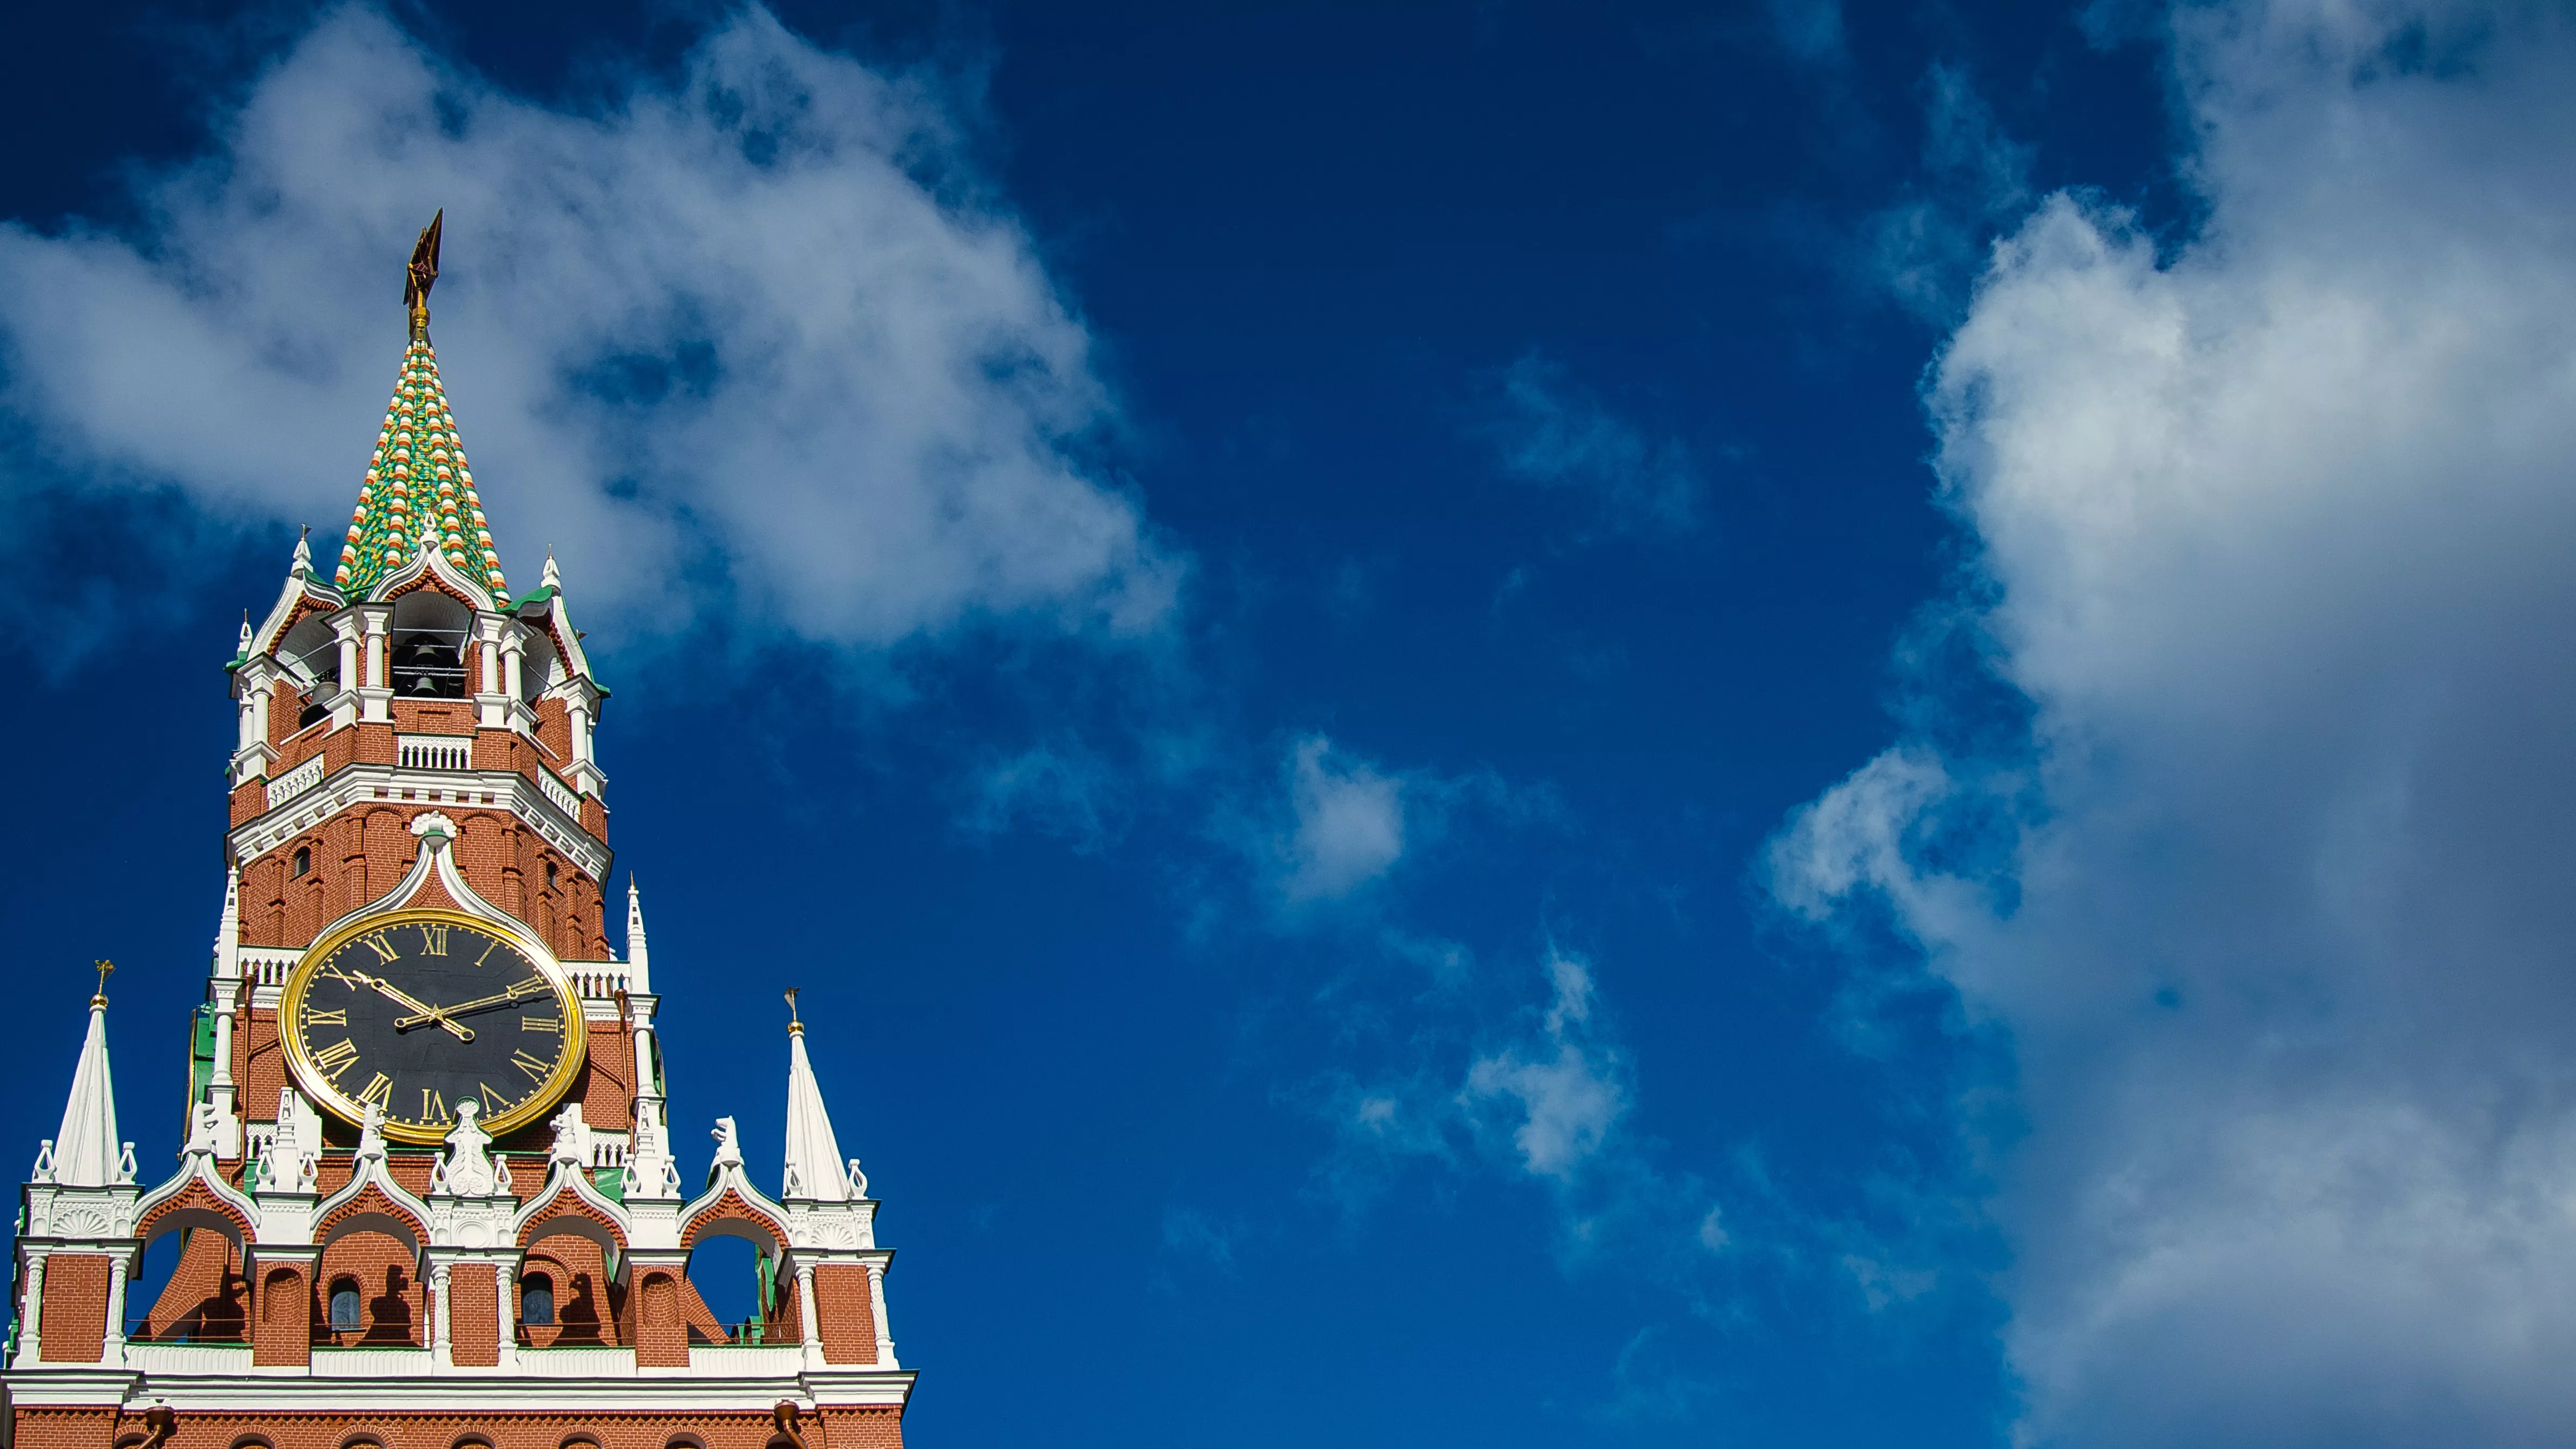 Spasskaya Tower in Russia, Europe | Architecture - Rated 3.9